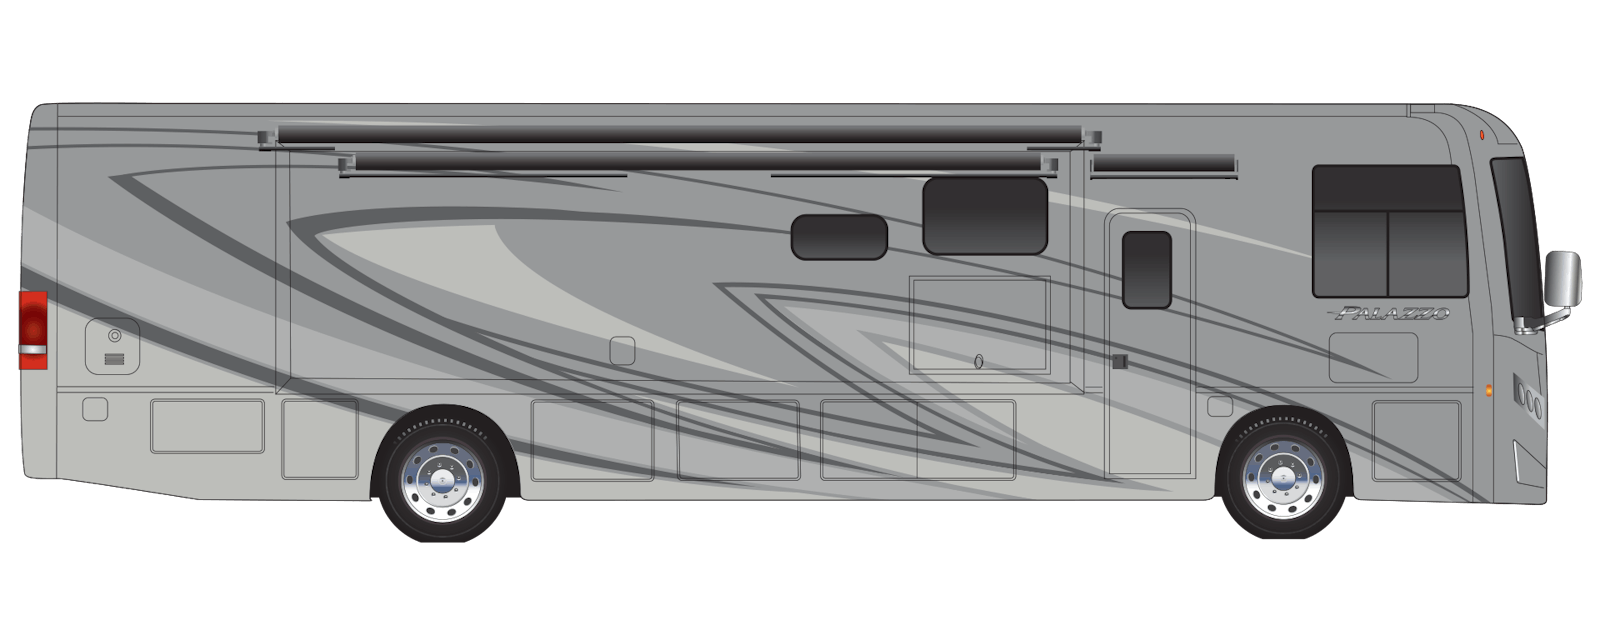 2023 Thor Palazzo Class A Diesel Pusher RV Crystal Downs Full Body Paint Exterior Artwork